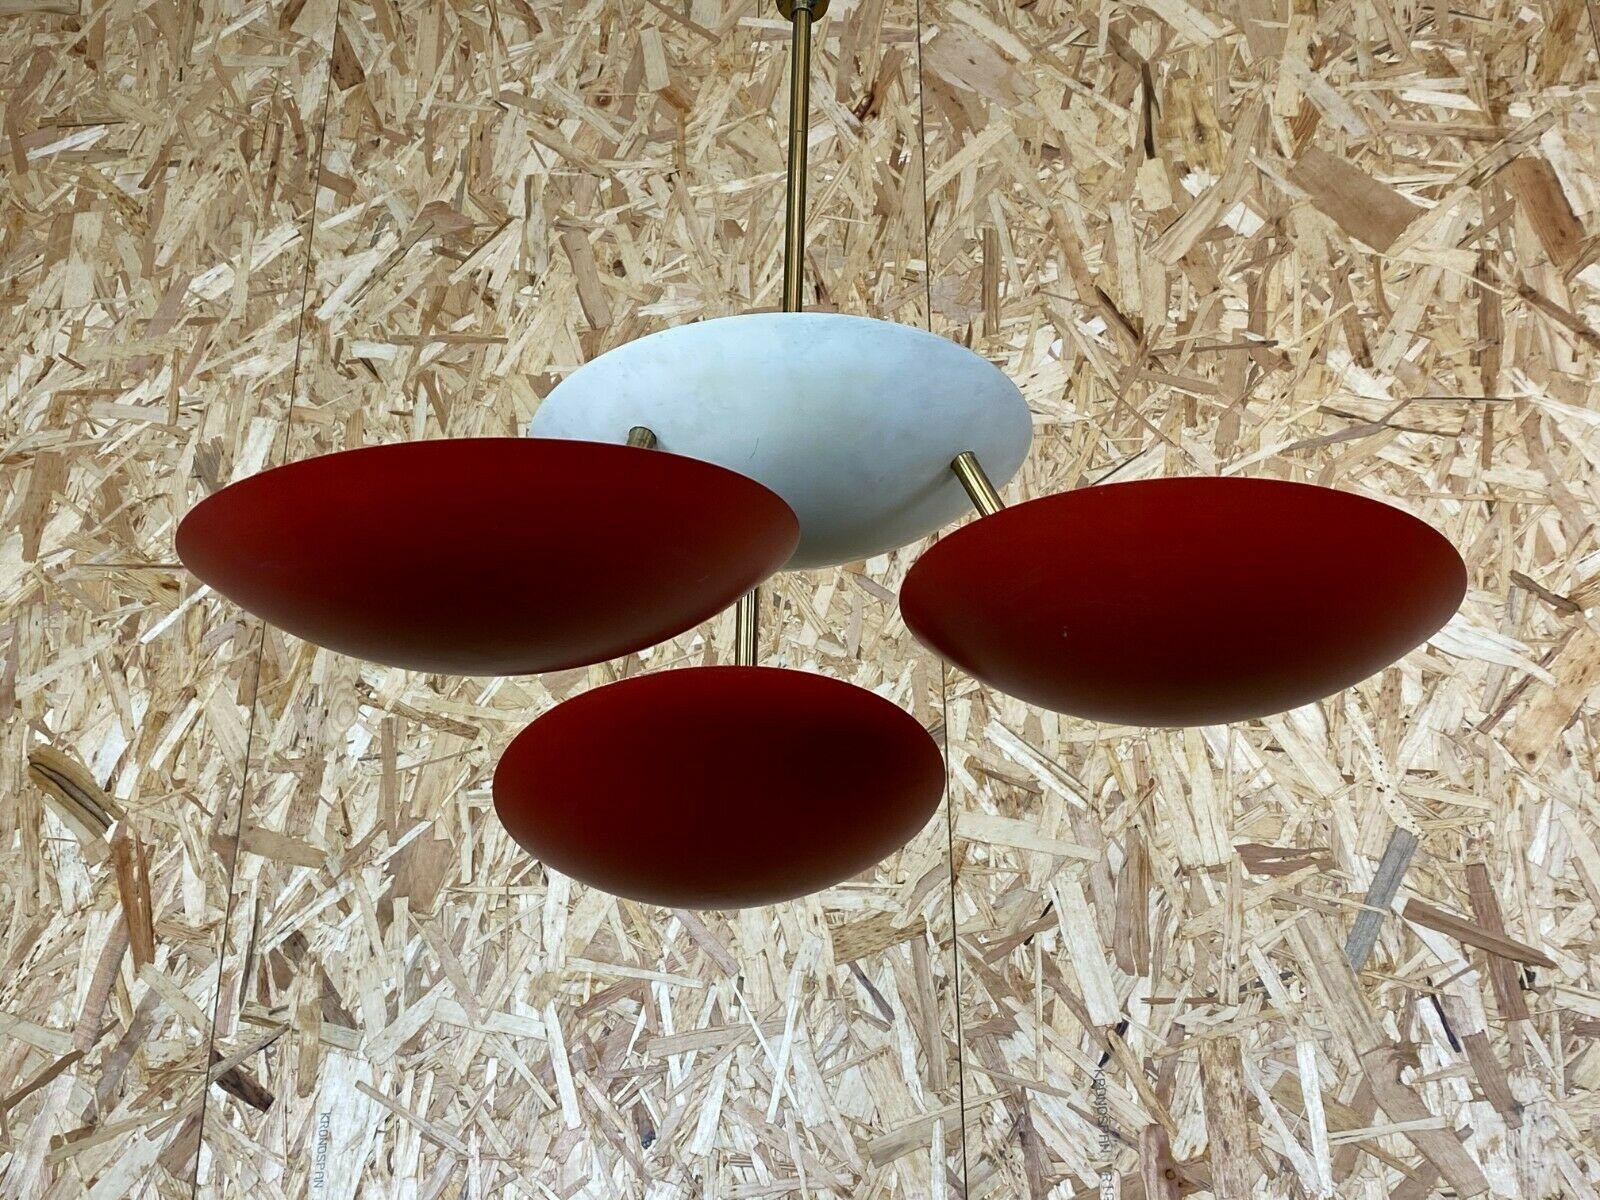 50s 60s Stilnovo lamp light bauhaus mid century sheet metal Design 60s 50s

Object: ceiling lamp

Manufacturer:

Condition: good - vintage

Age: around 1950-1960

Dimensions:

55cm x 55cm x 52cm

Other notes:

The pictures serve as